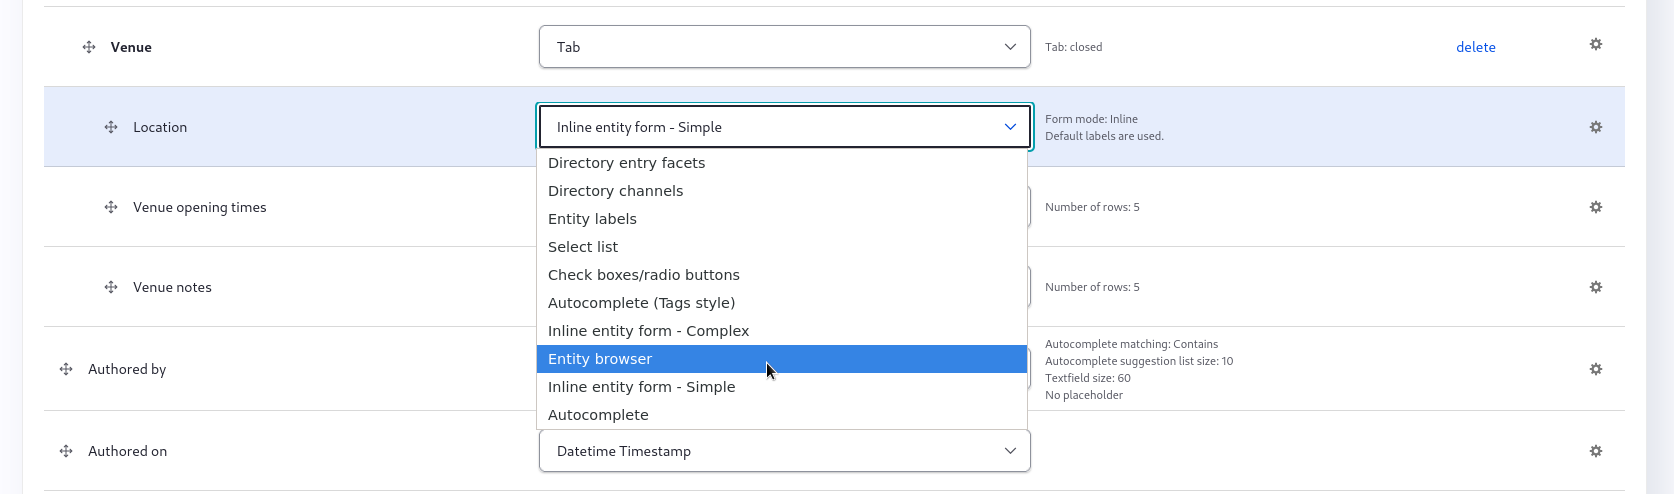 Drop down selecting the Entity Browser for the widget for Location field